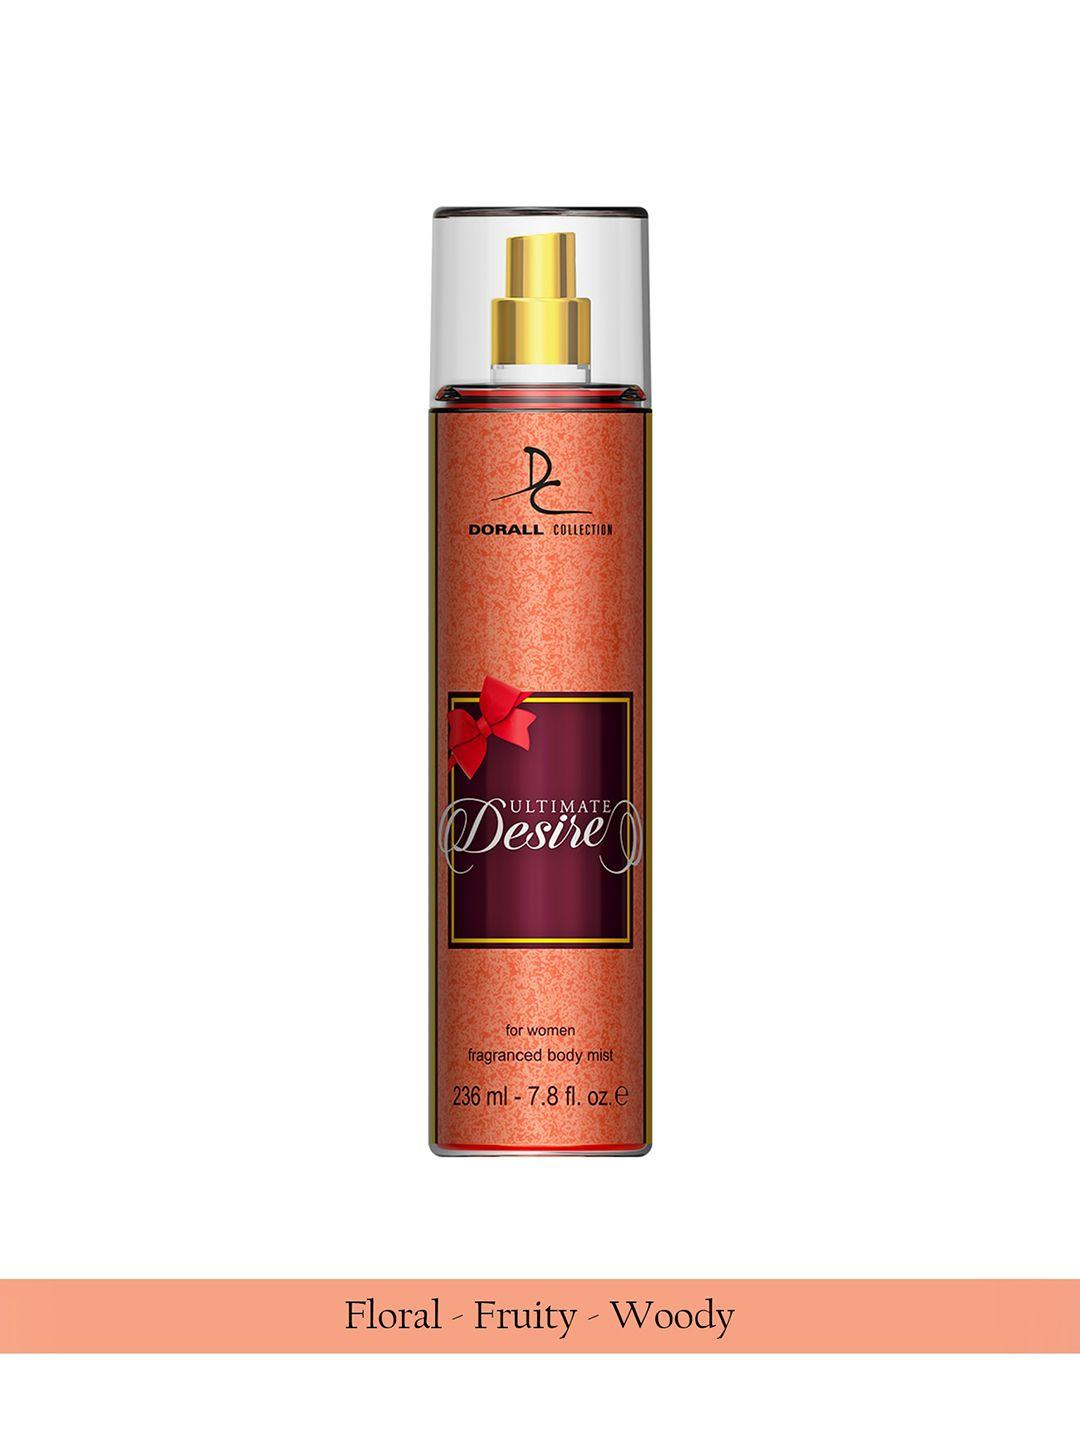 dorall collection women ultimate desire fragrance body mist - 236 ml